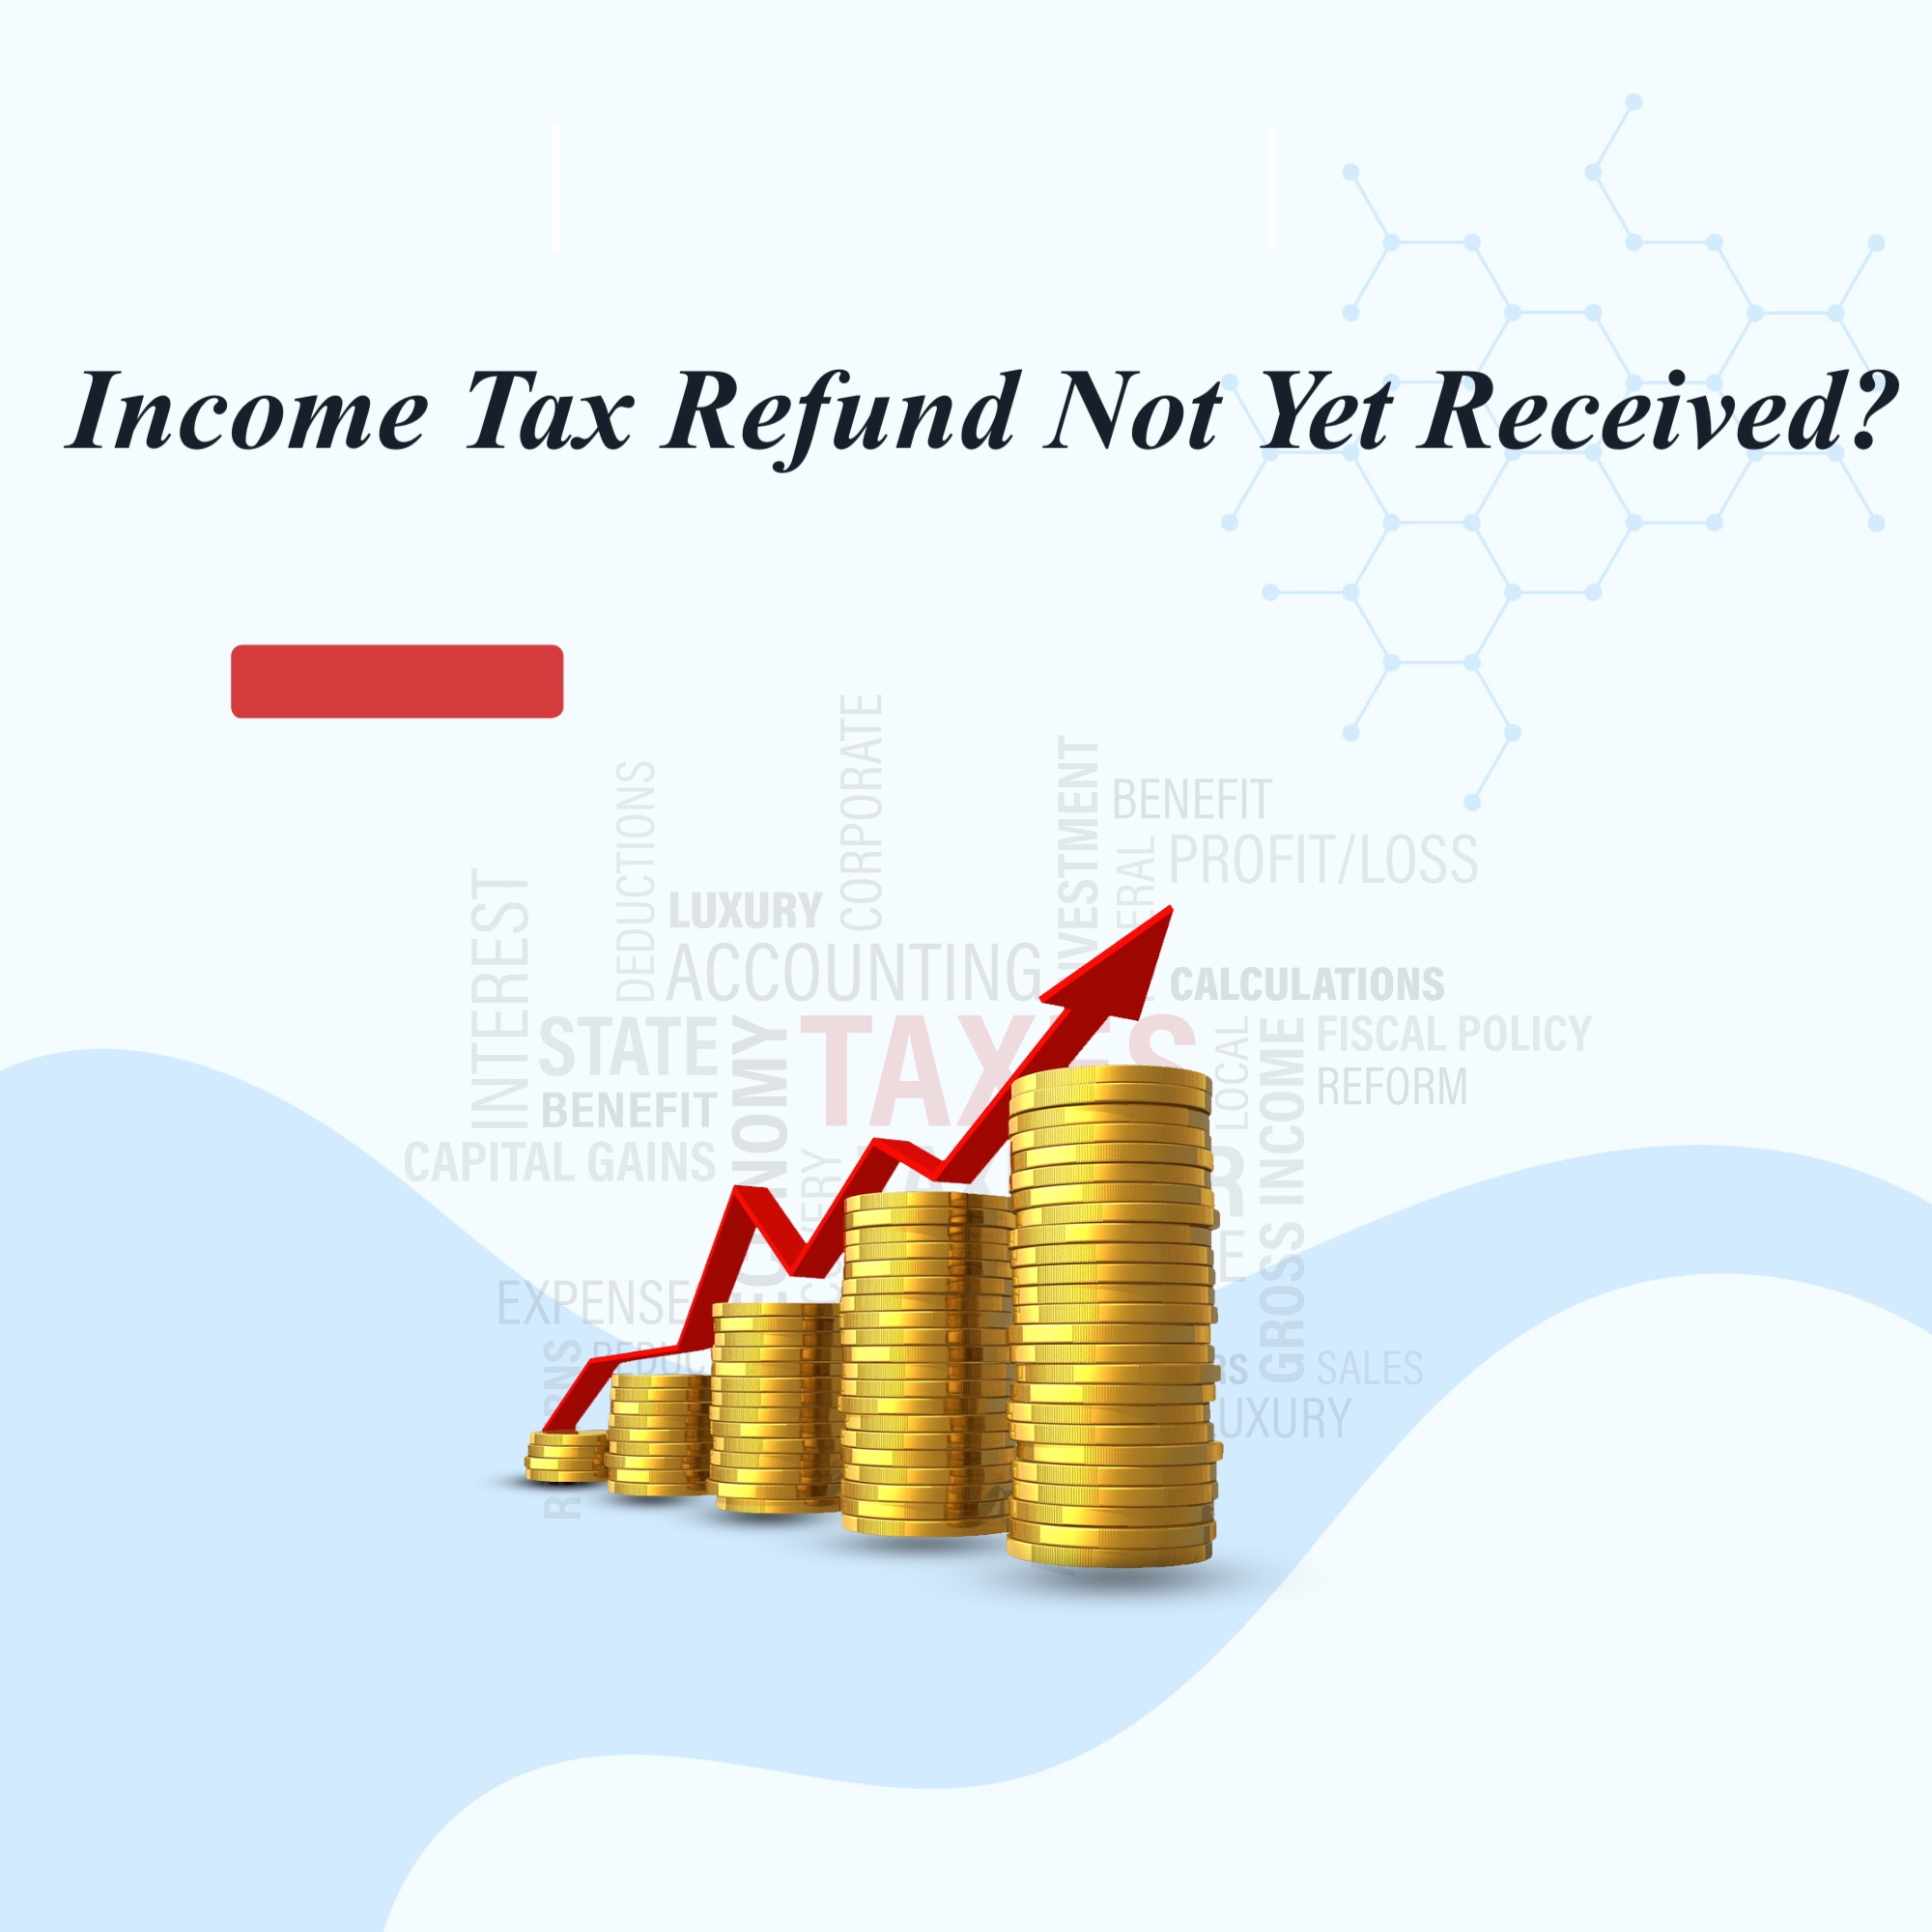 Income tax refund not yet received